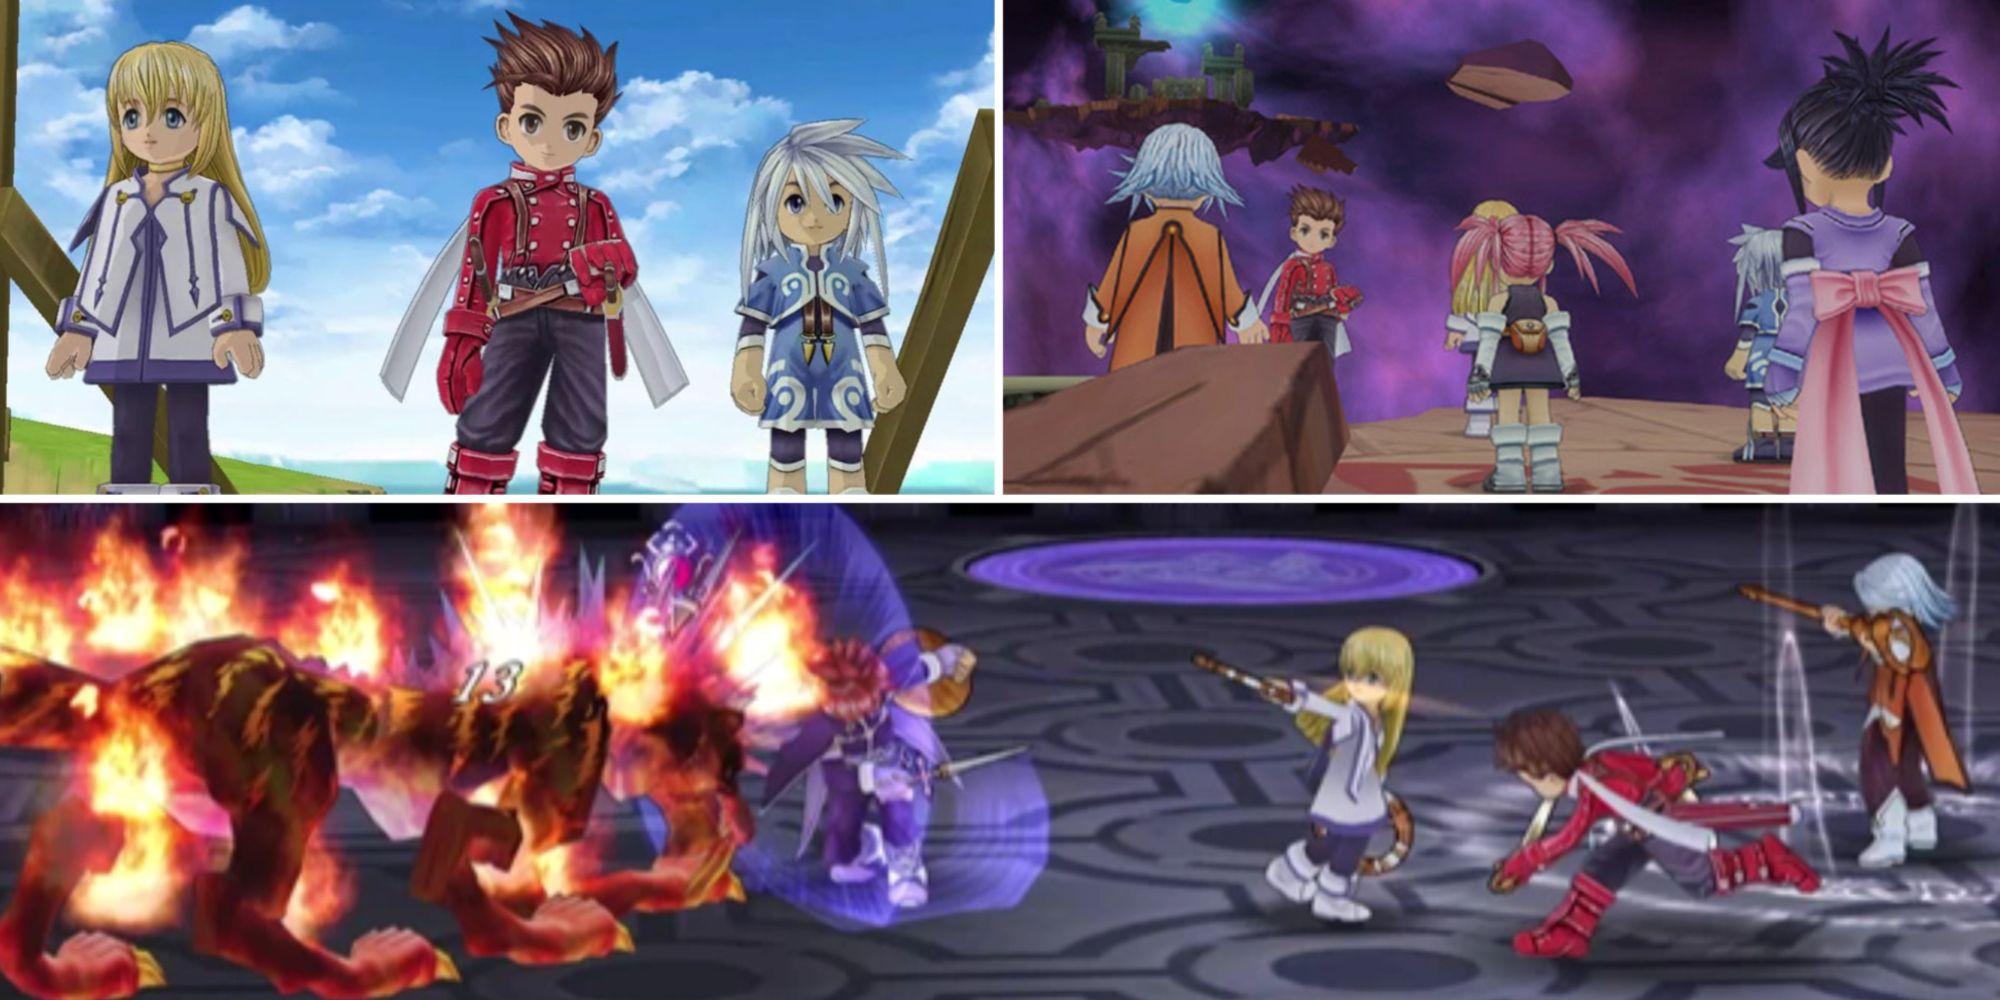 A collage of images from Tales of Symphonia Remastered. The top left image showcases Colette, Lloyd, and Genis standing on a bridge. The top left image showcases the main party standing near the edge of a ruin. And the bottom image is the party in an encounter, with Colette and Raine casting Spells and Lloyd and Kratos rushing in toward the monster to attack.